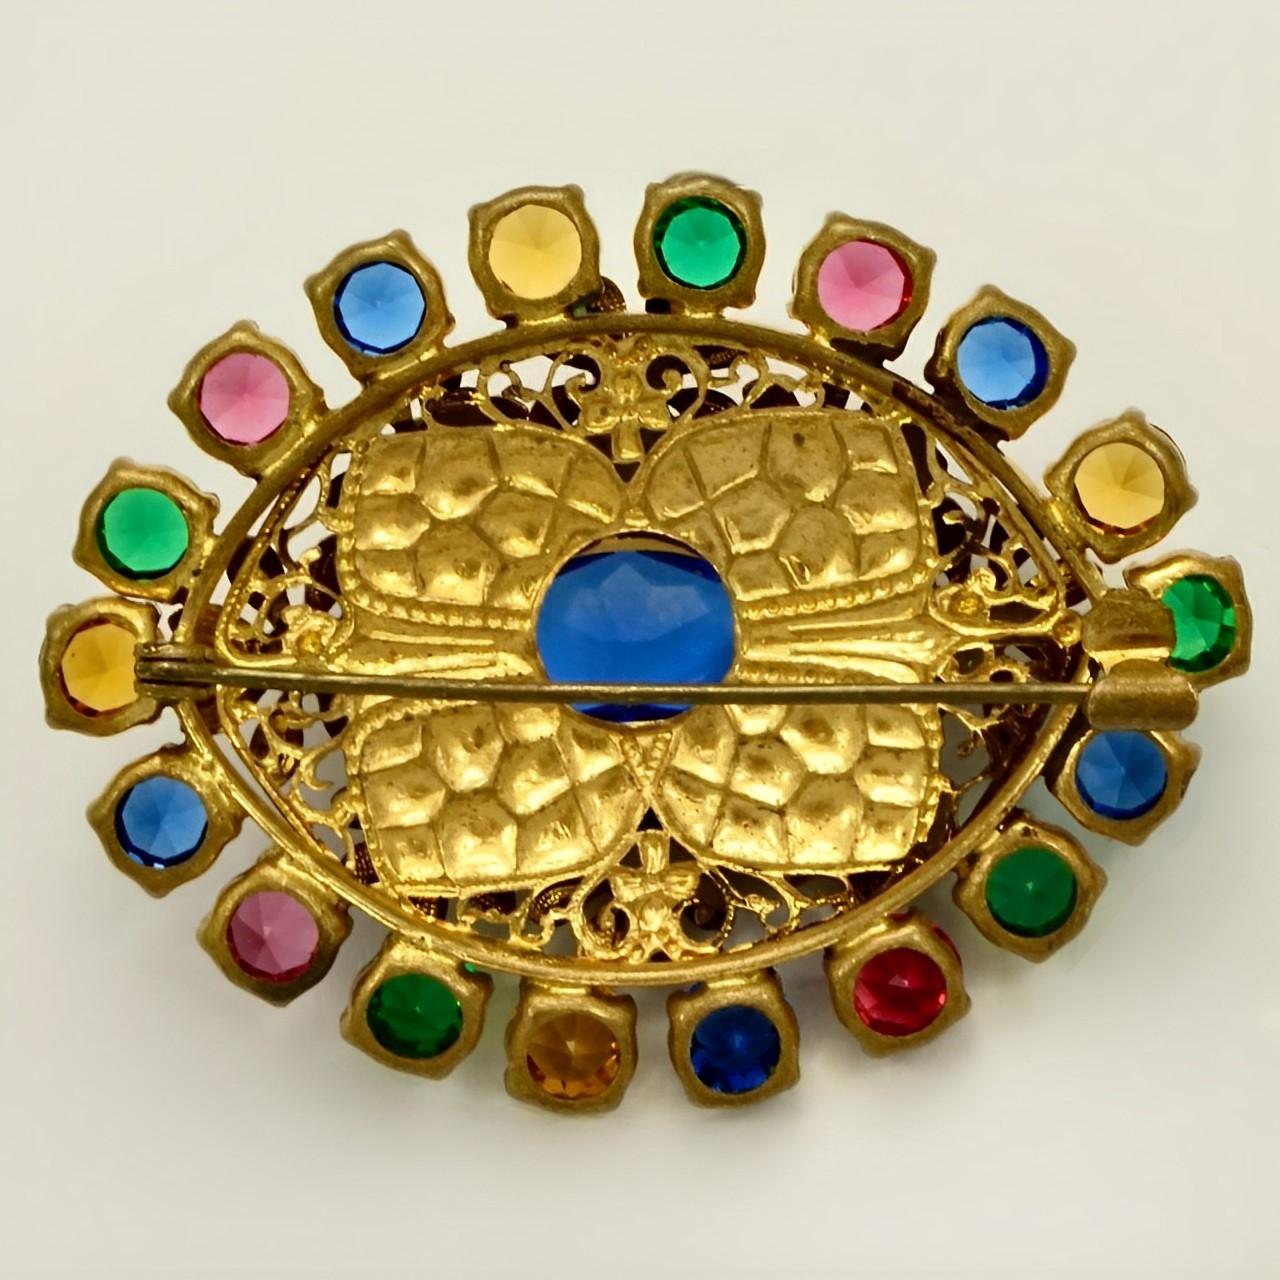 Beautiful Czech gilt metal floral brooch, with lovely multi coloured glass stones. Measuring length 5.5 cm / 2.1 inches by 4.4 cm / 1.7 inches. The brooch is in very good condition. There is wear to the gilt metal.

This is a wonderfully stylish